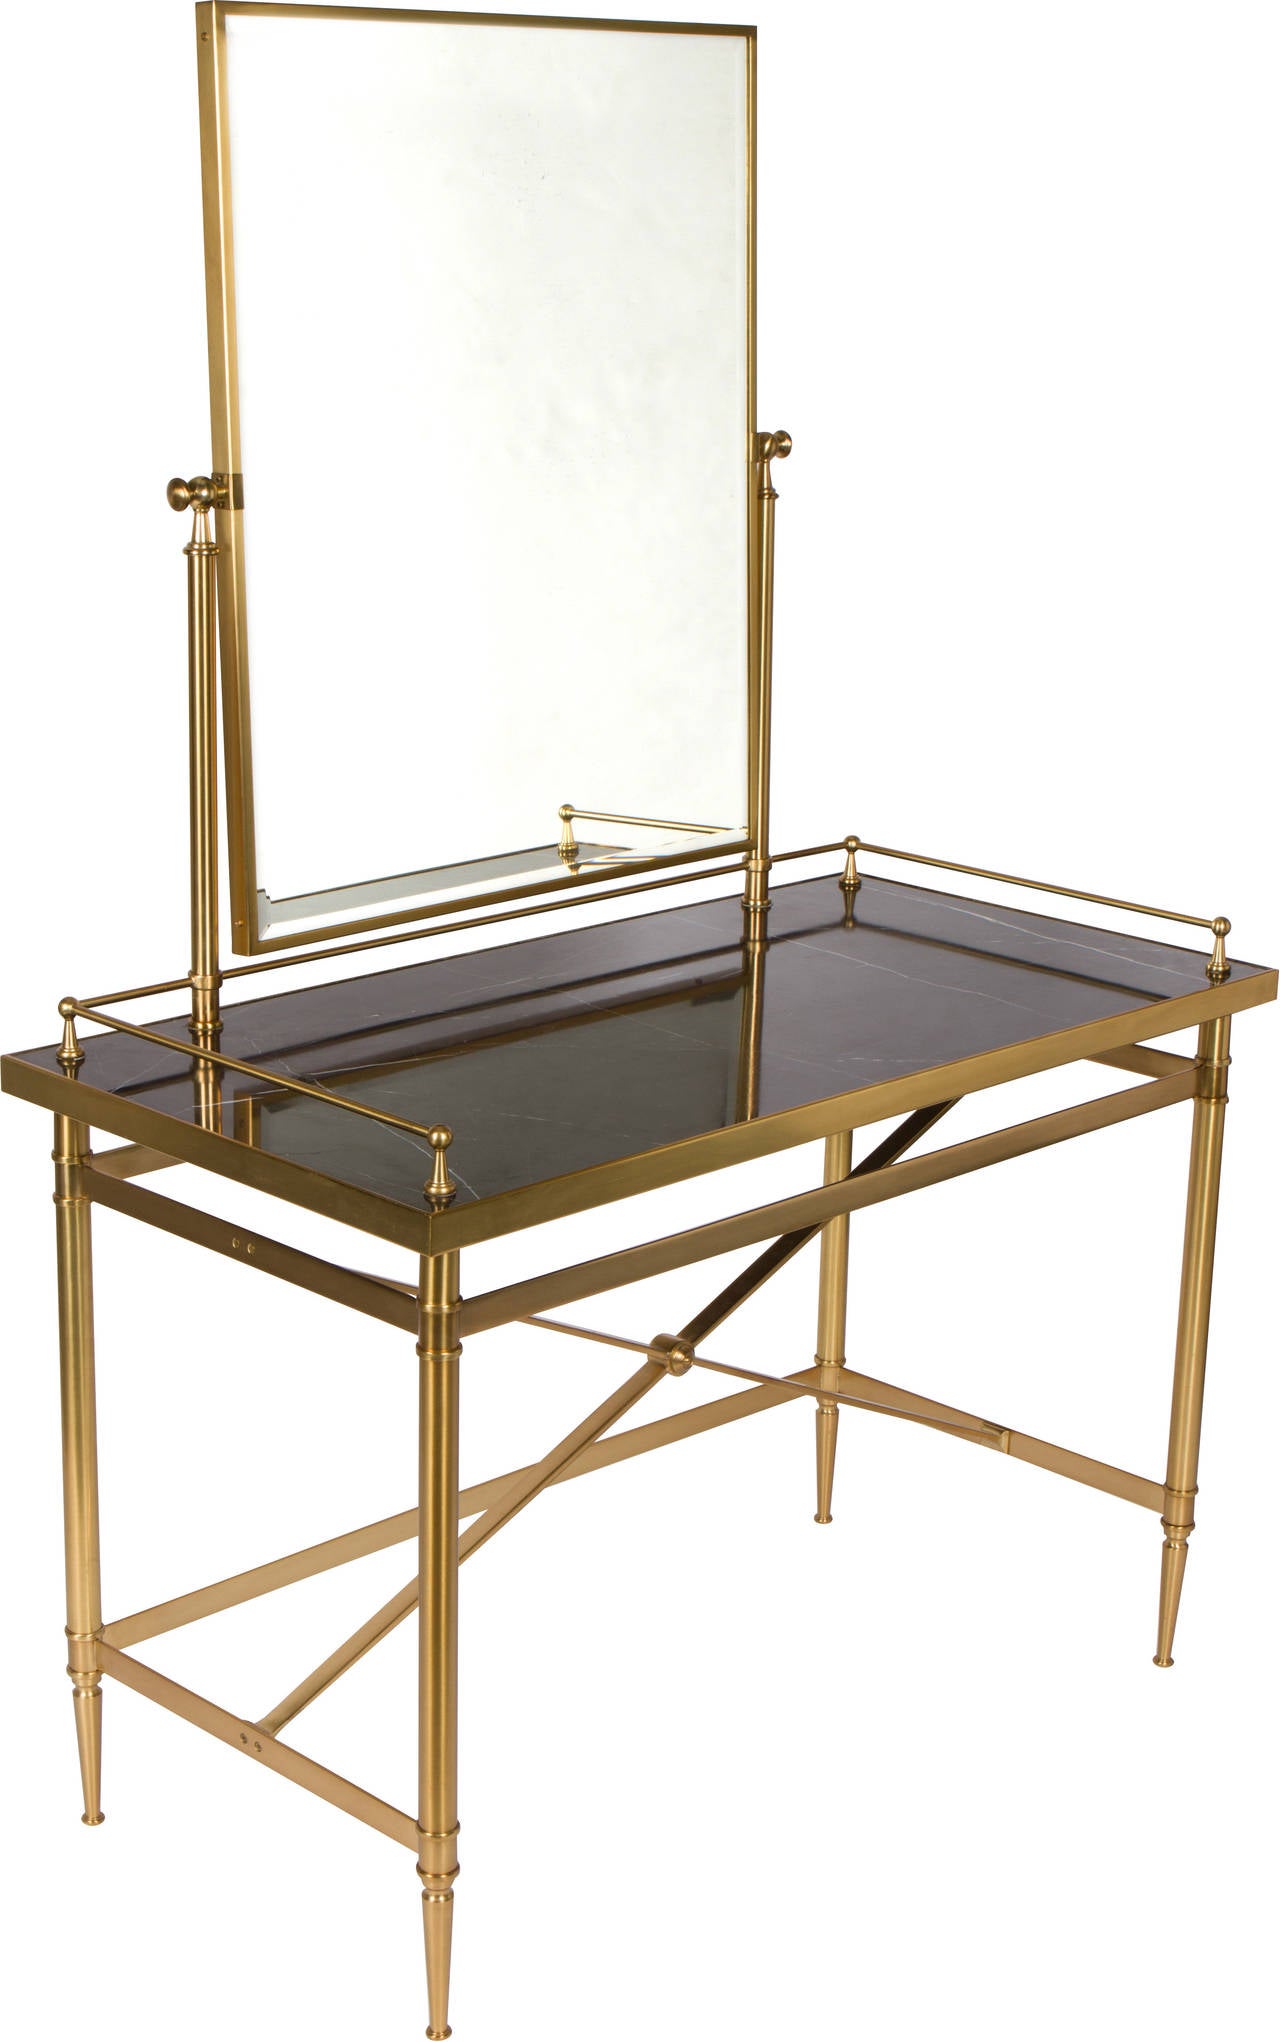 Glamorous brass and marble-top vanity table with attached mirror, circa 1980s.